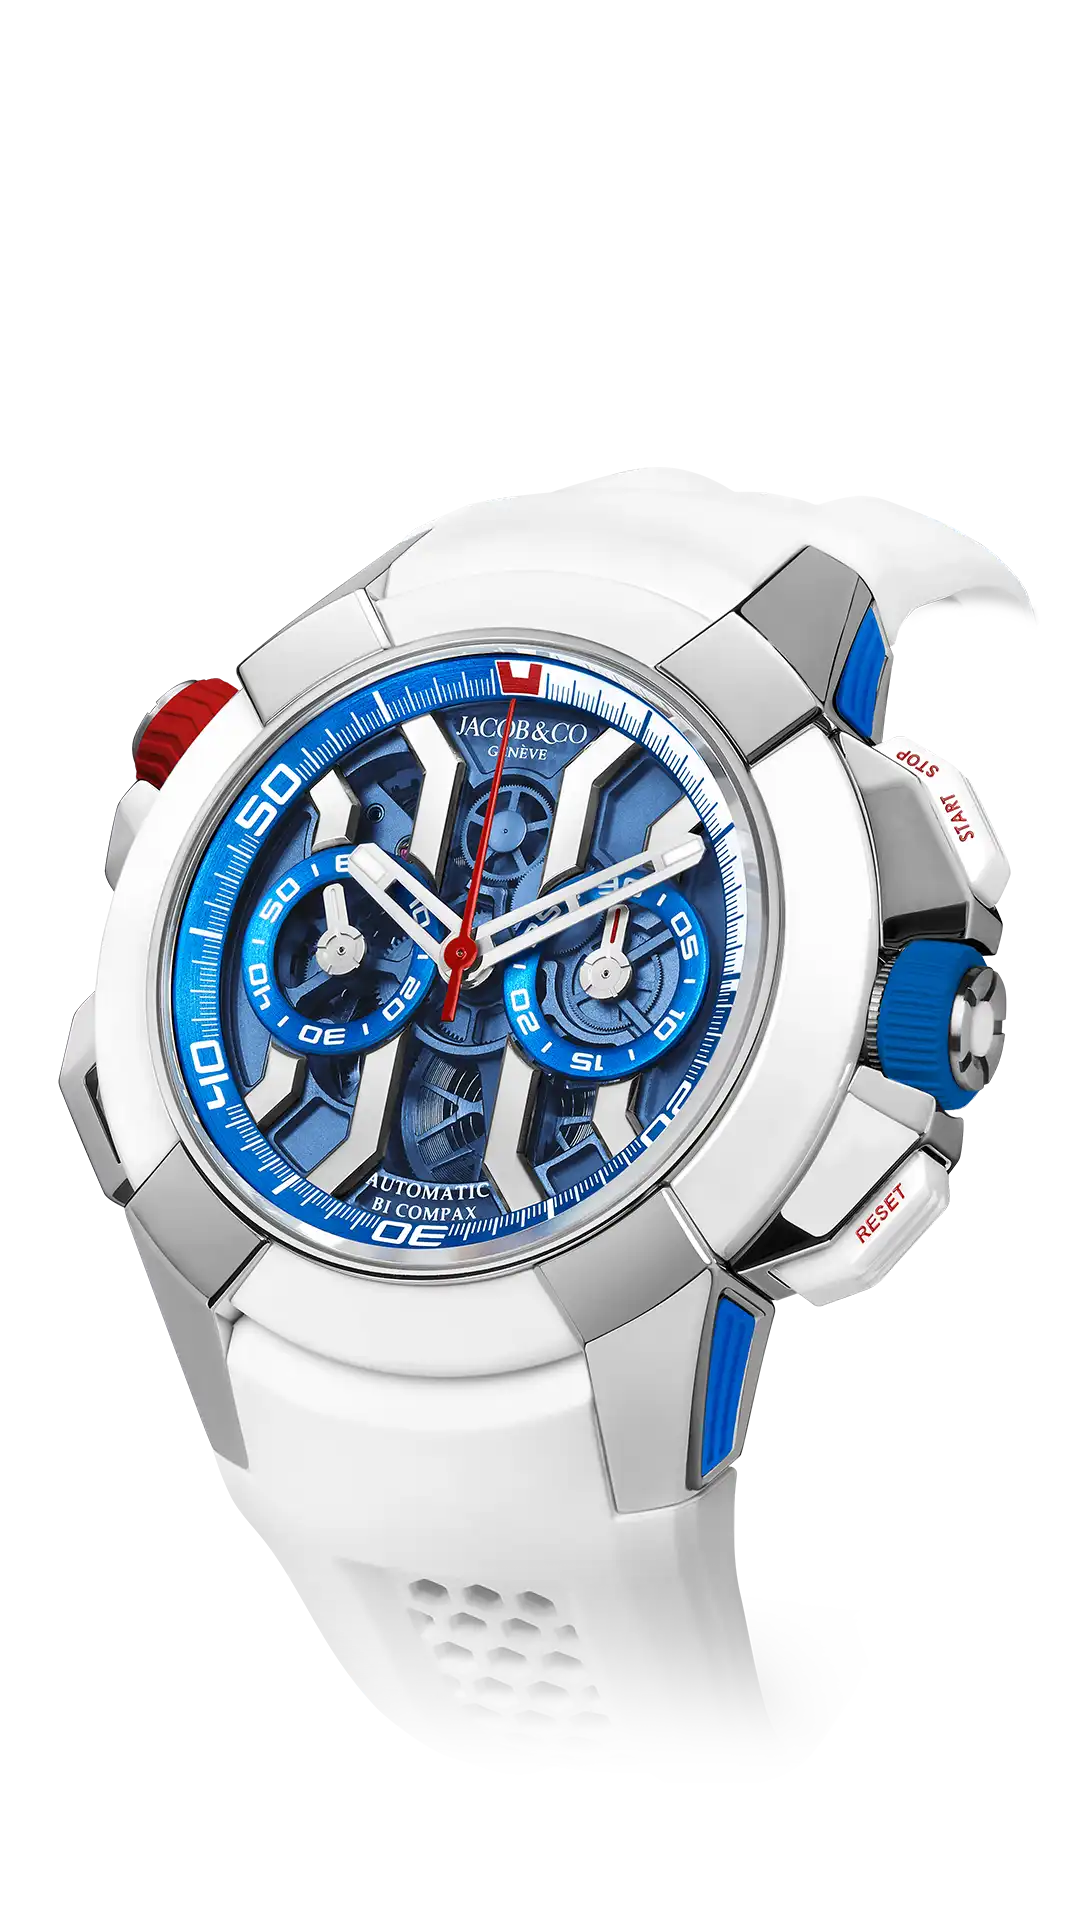 Epic X Chrono 47MM Watch | Summer Edition, Red & Blue Crowns Jacob & Co.